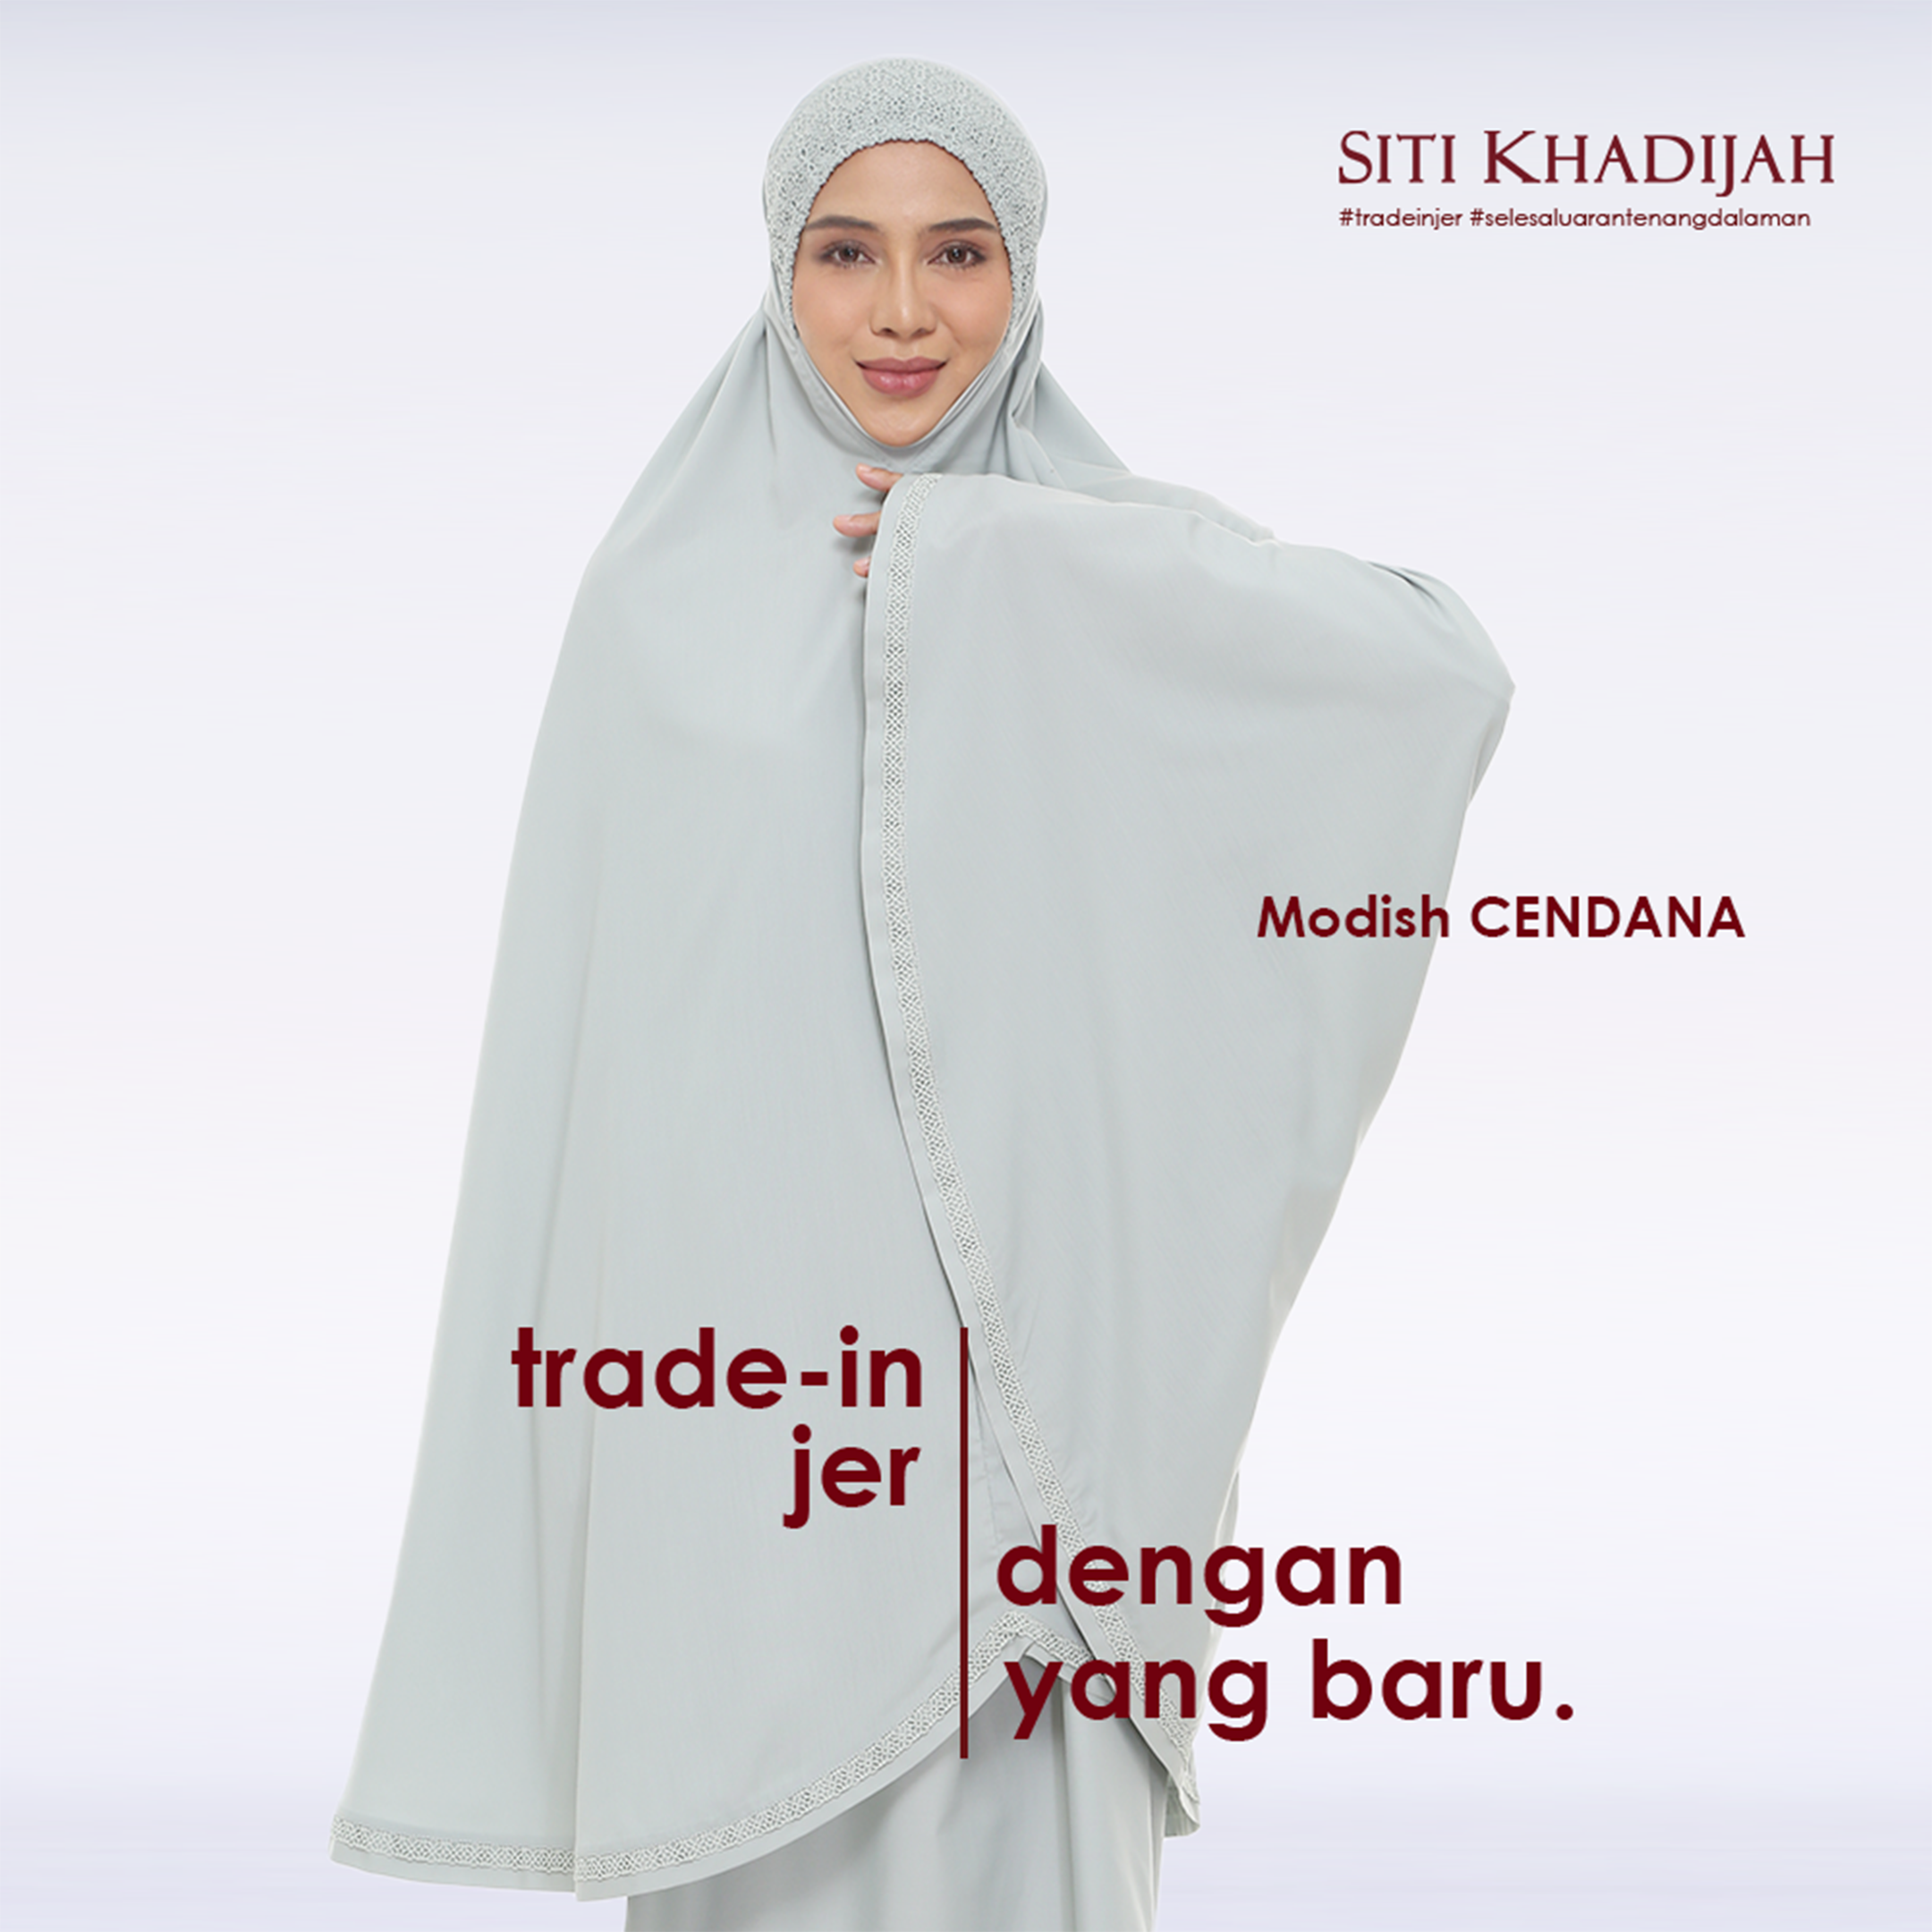 https://sitikhadijah.com/pages/trade-in-campaign